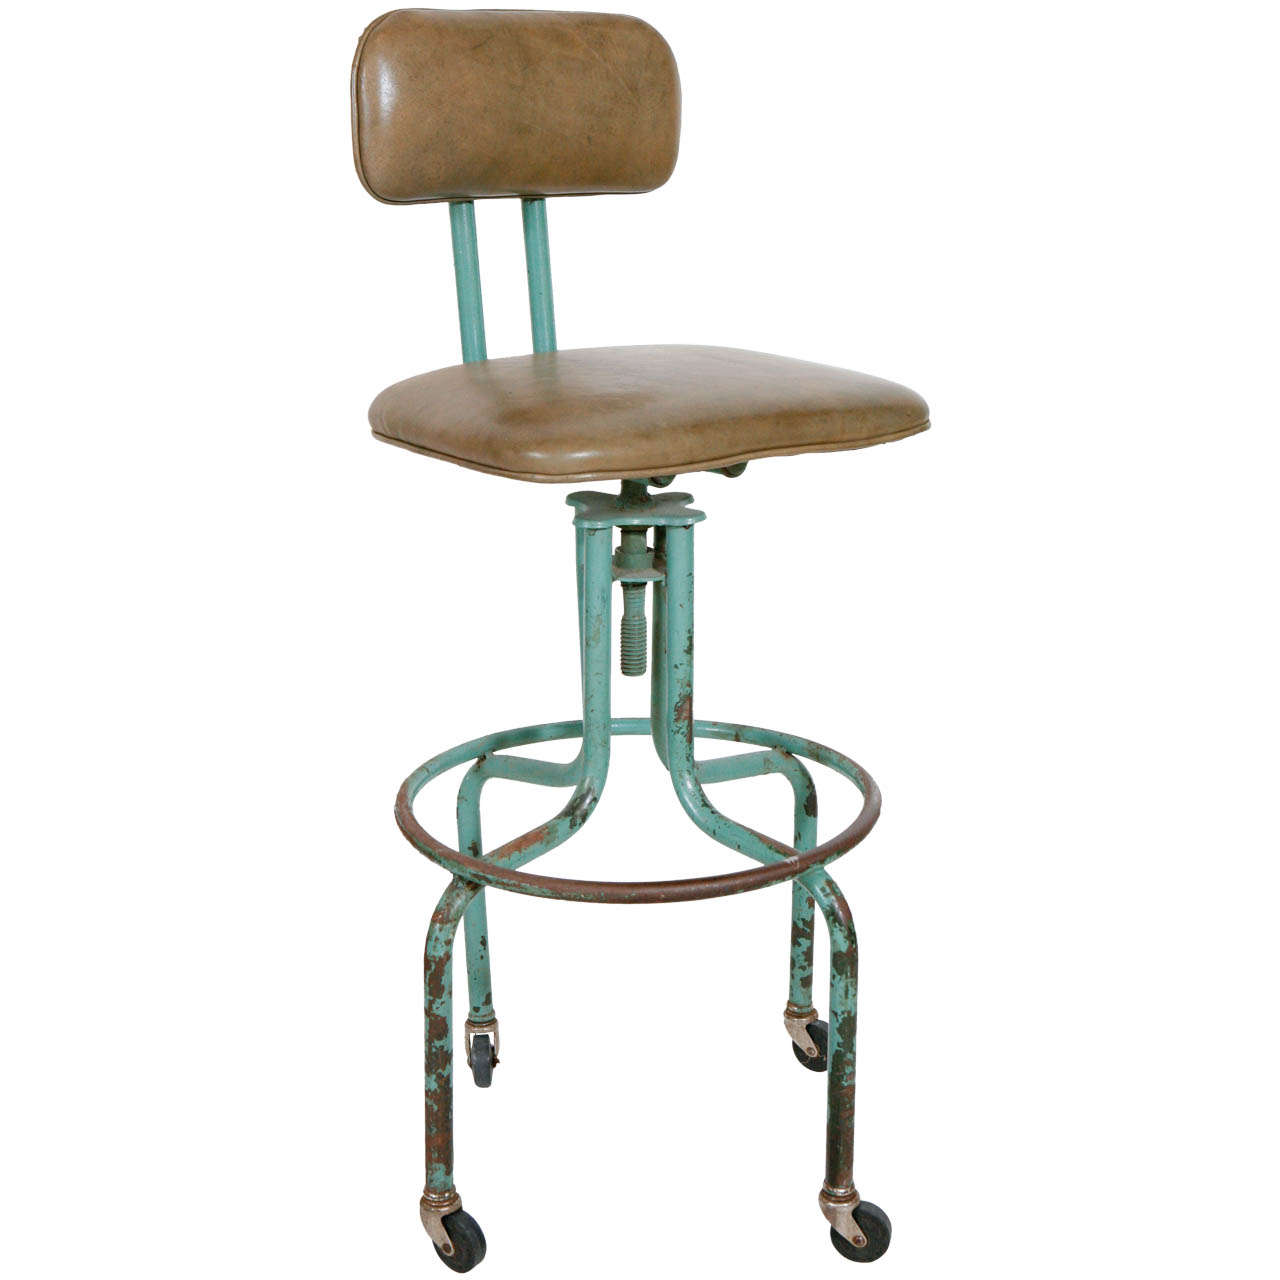 Vintage Green Workshop Stool with Nailhead Leather Seat and Wheels